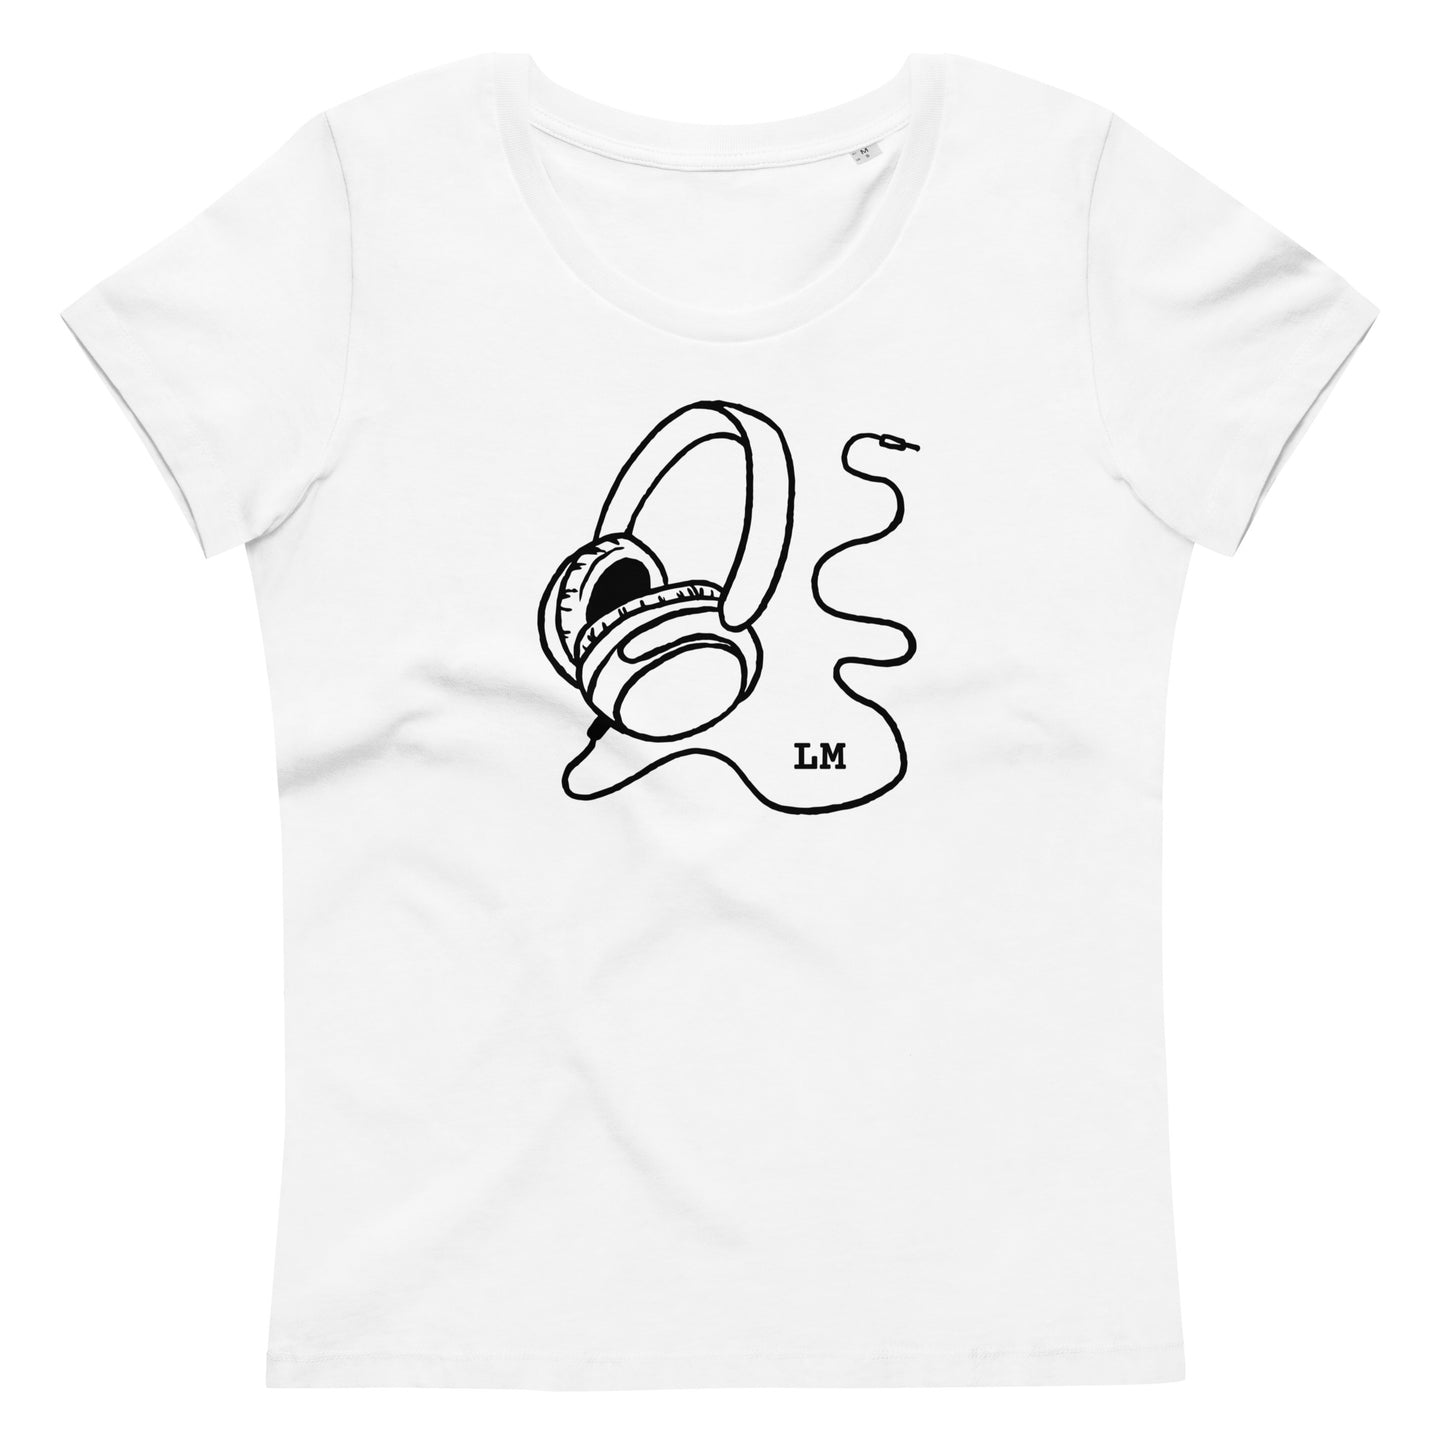 LM headphones fitted tee